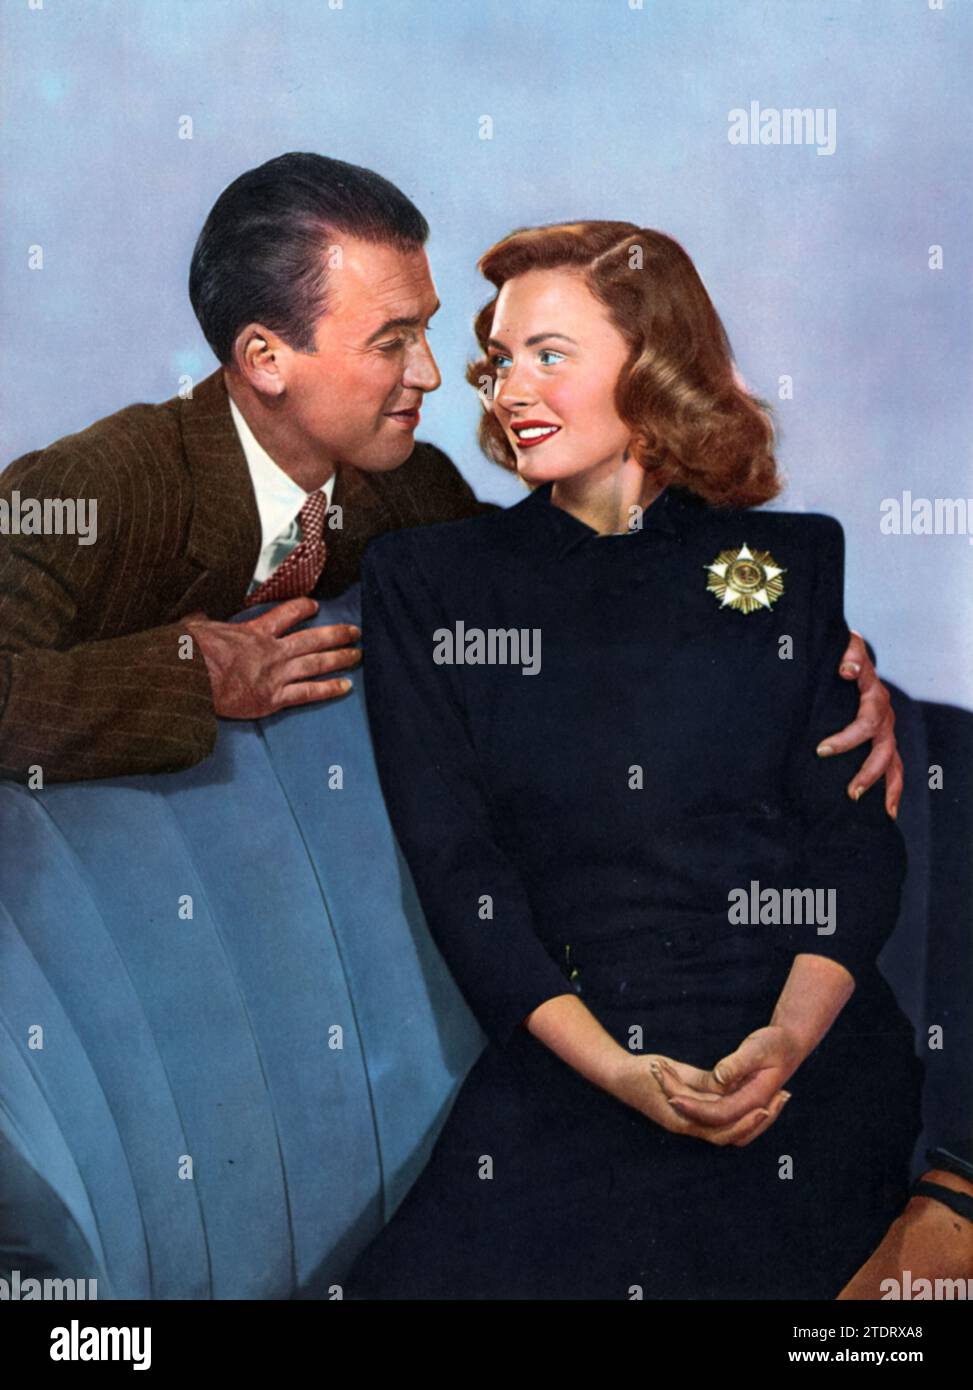 Portrait of James Stewart and Donna Reed, both co-stars in the iconic film 'It's a Wonderful Life' (1946). Directed by Frank Capra, this timeless classic tells the touching story of George Bailey, portrayed by Stewart, who gets a glimpse of what the world would have been like without him, thanks to an angel named Clarence. Reed, playing the role of Mary Hatch, is George's loving and supportive wife. The film's heartfelt message and the undeniable chemistry between Stewart and Reed have solidified its place as a beloved holiday favorite for generations. Stock Photo